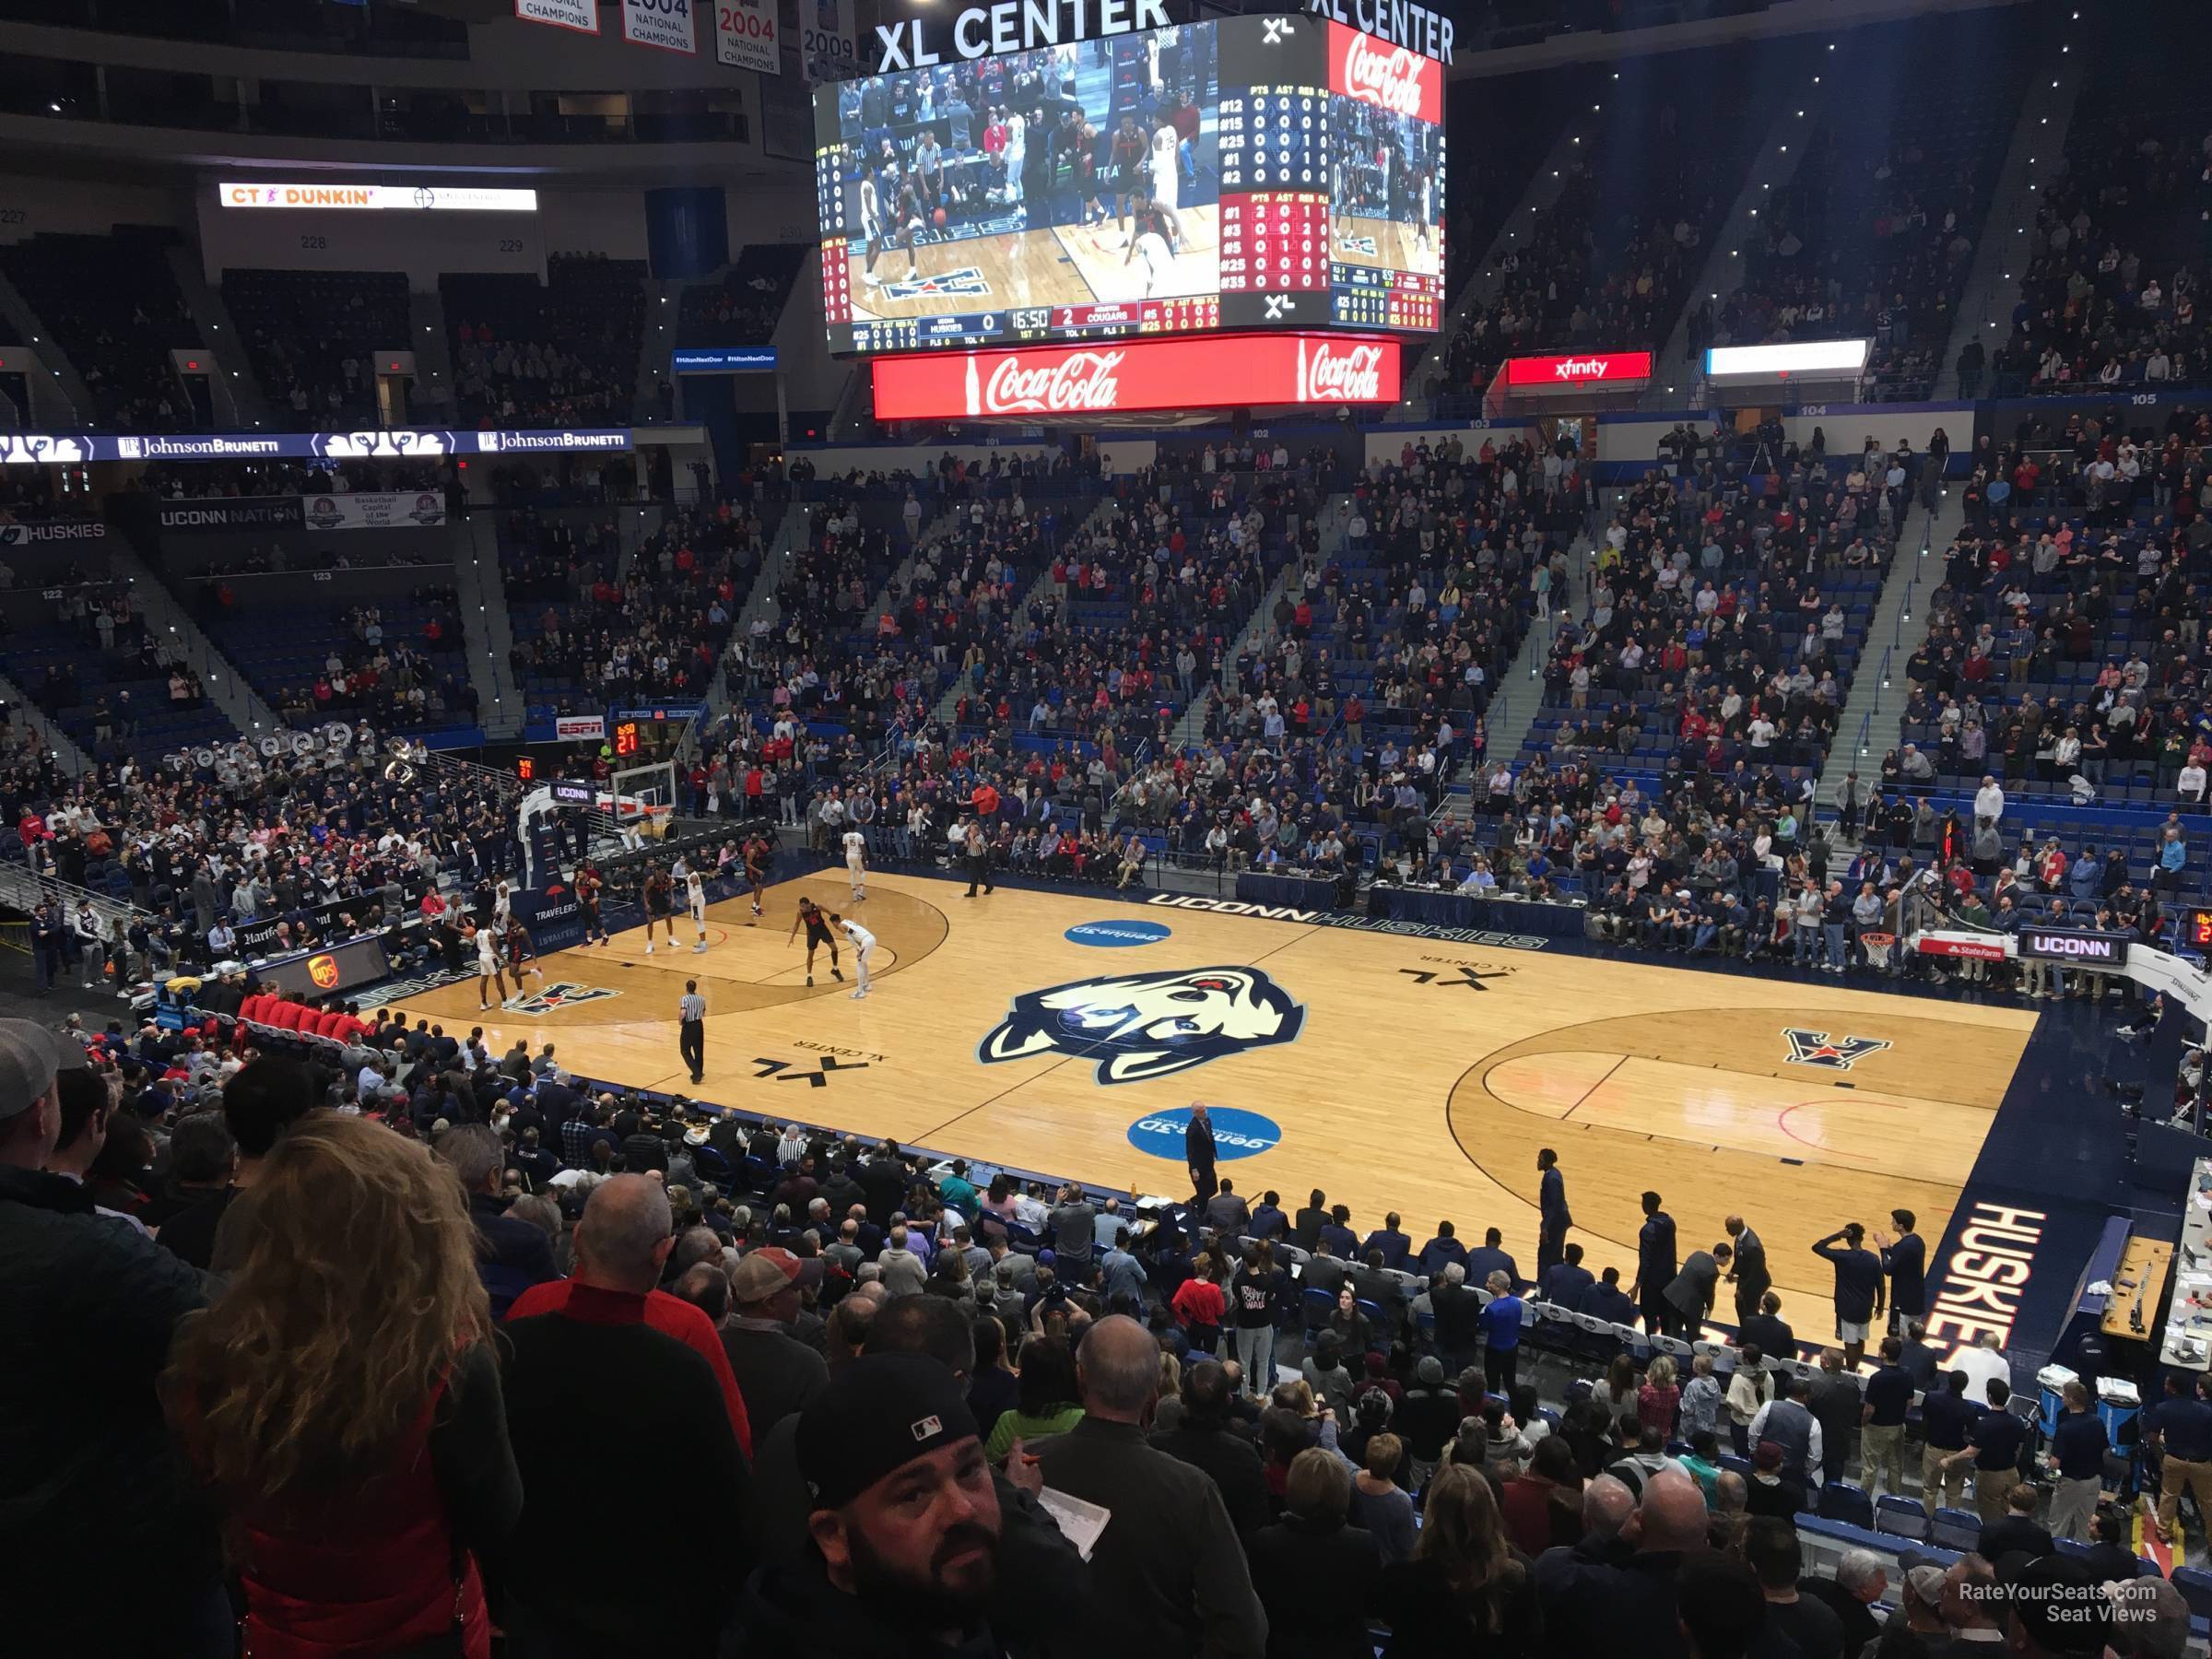 section 114, row r seat view  - xl center